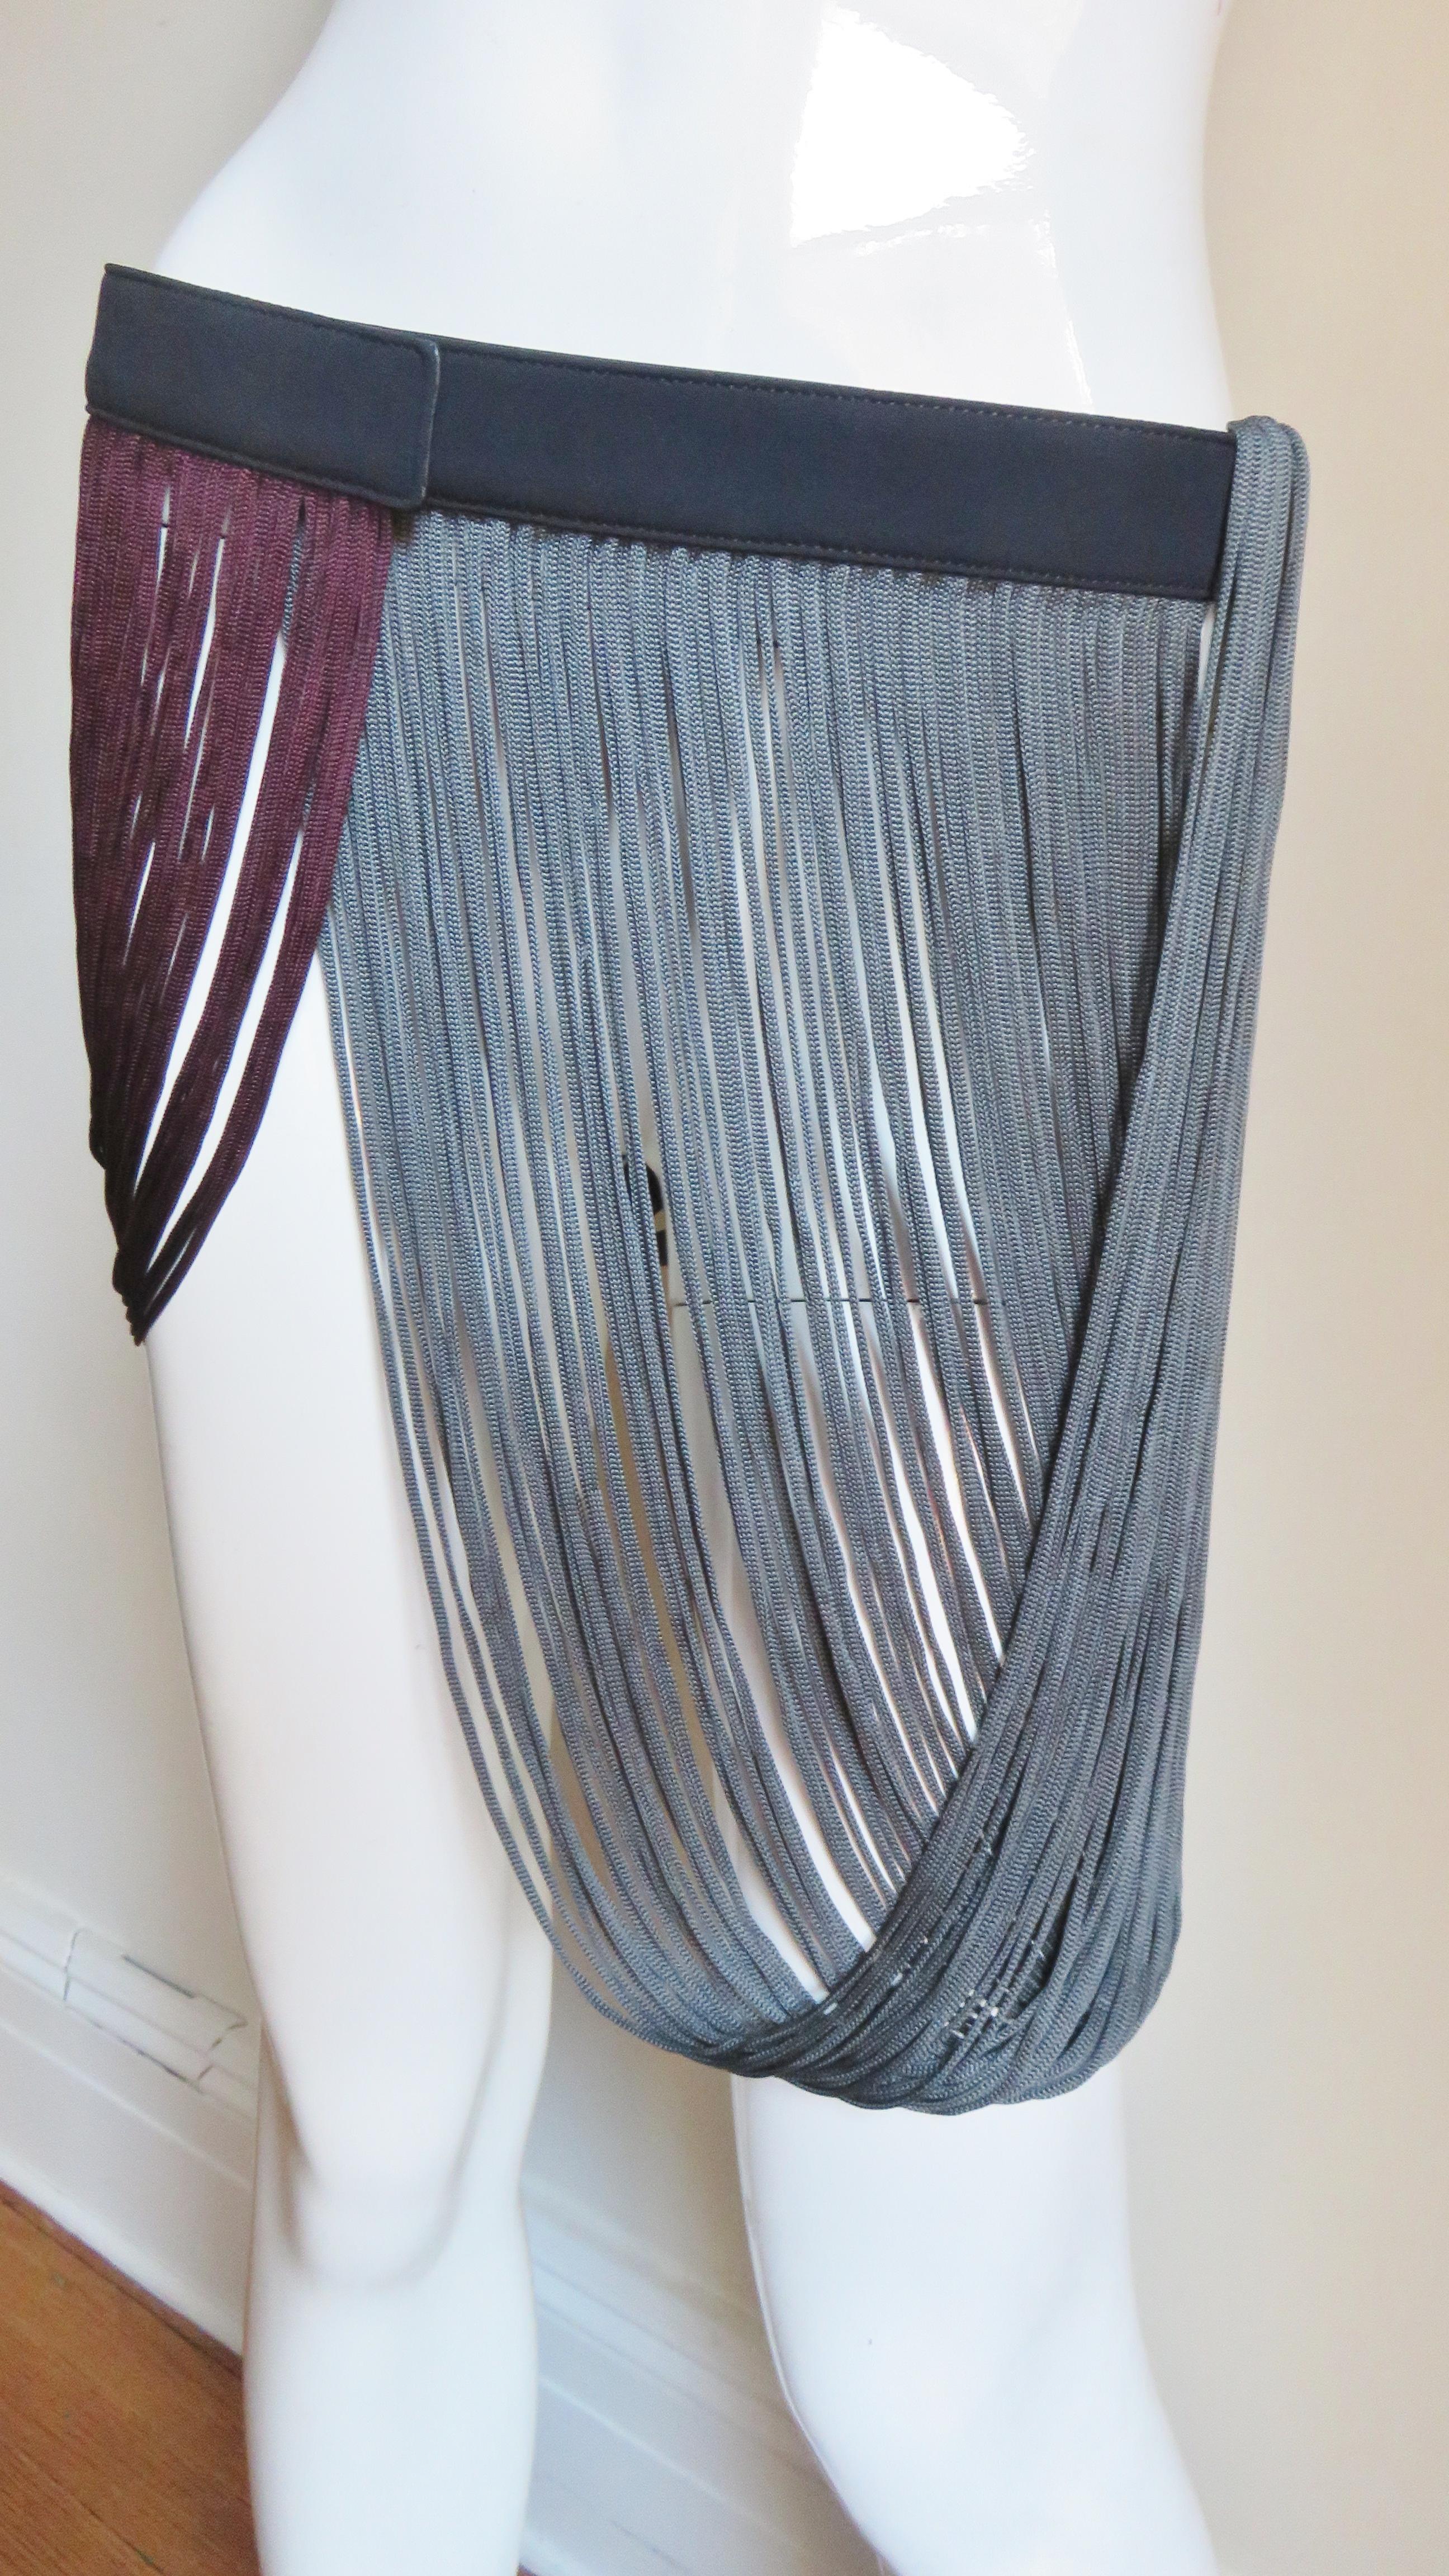 An incredible black silk belt from Stella McCartney with draping burgundy and grey silk fringe.  It snaps closed and is adjustable accommodating several sizes. New with box.
Fits sizes Small, Medium.

Width  1.50